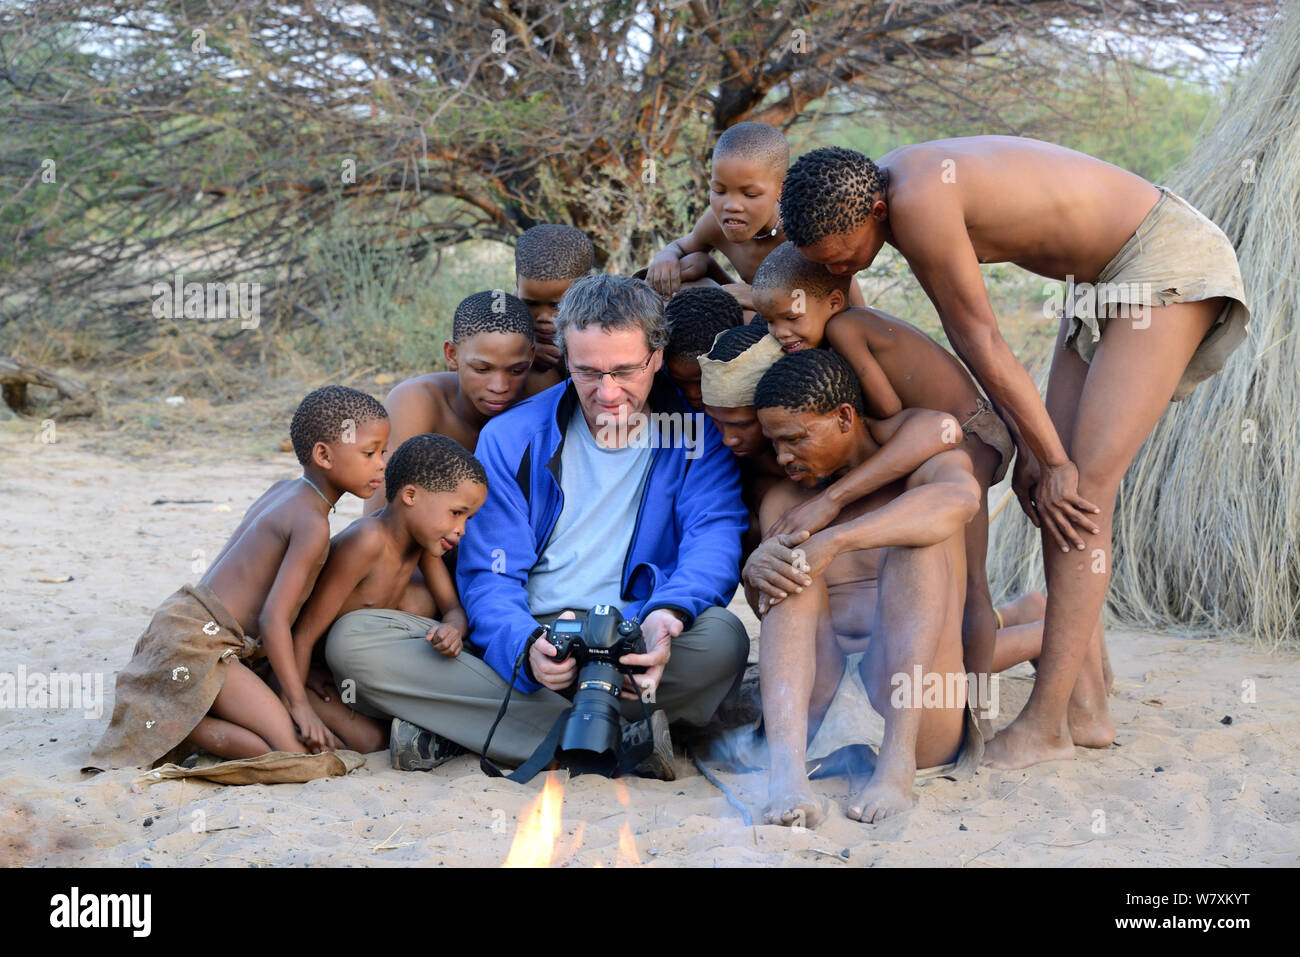 Photographer Eric Baccega showing pictures to Naro San Bushmen family with children wearing traditional clothing made with duiker leather. Kalahari, Ghanzi region, Botswana, Africa. Dry season, October 2014. Stock Photo